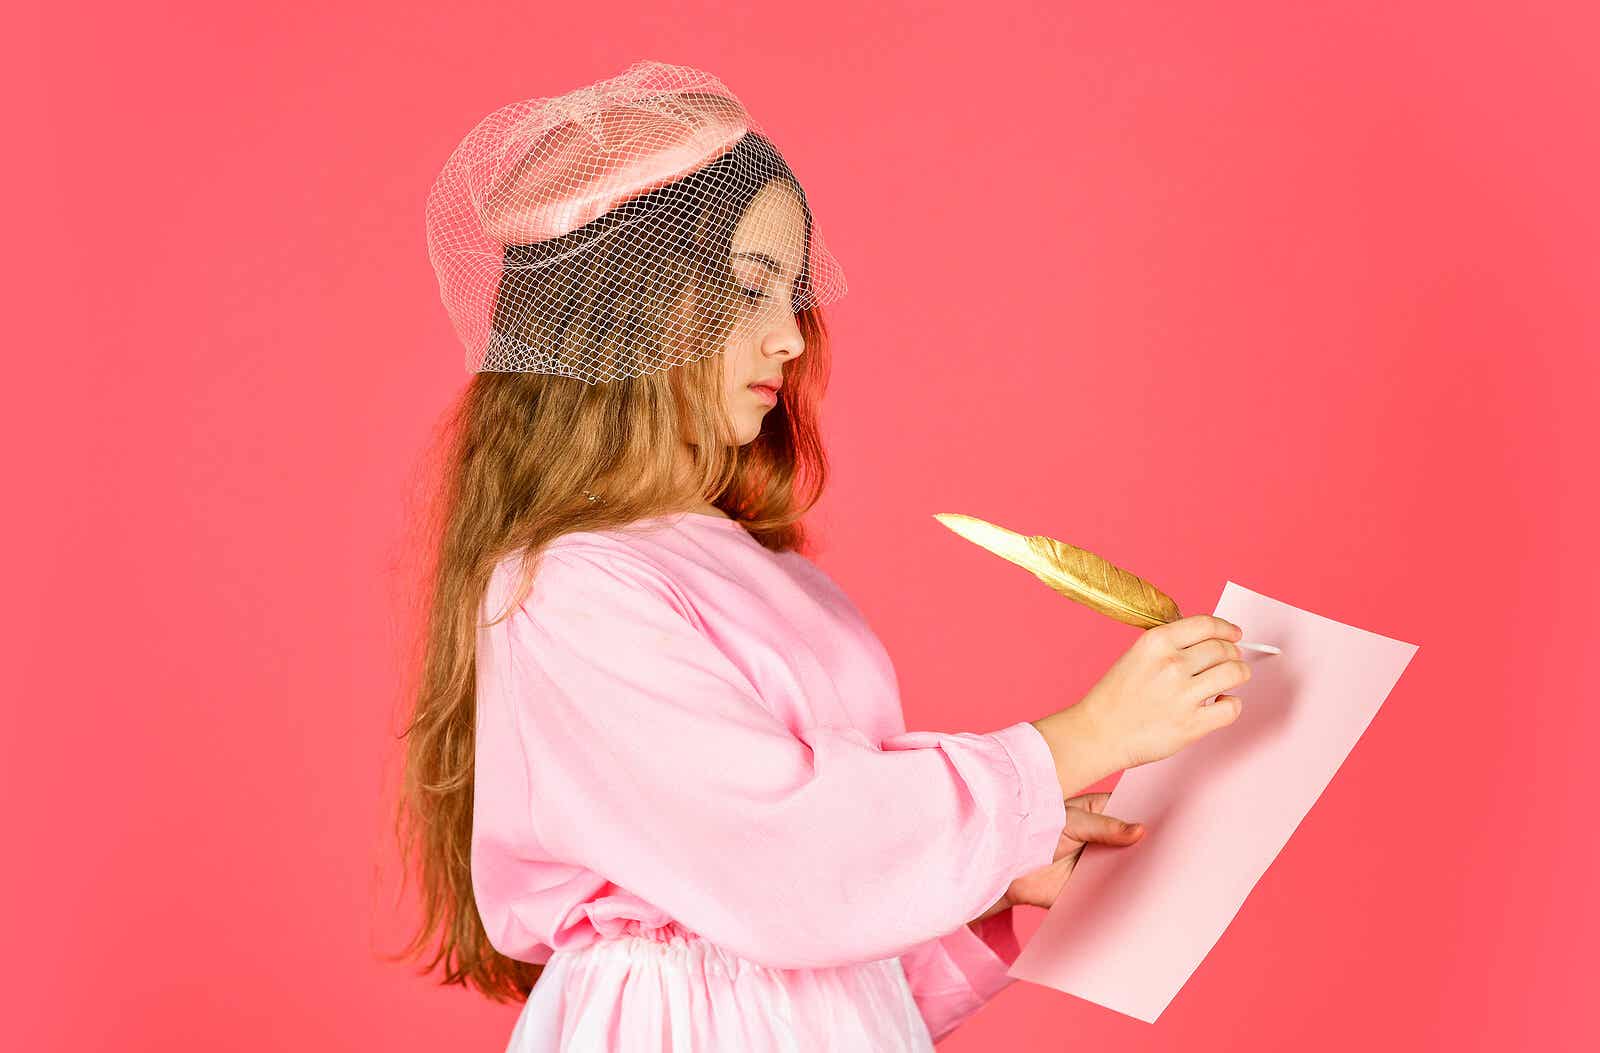 A girl dressed up with an old fashioned hat and dress, writing on a paper with a feather.